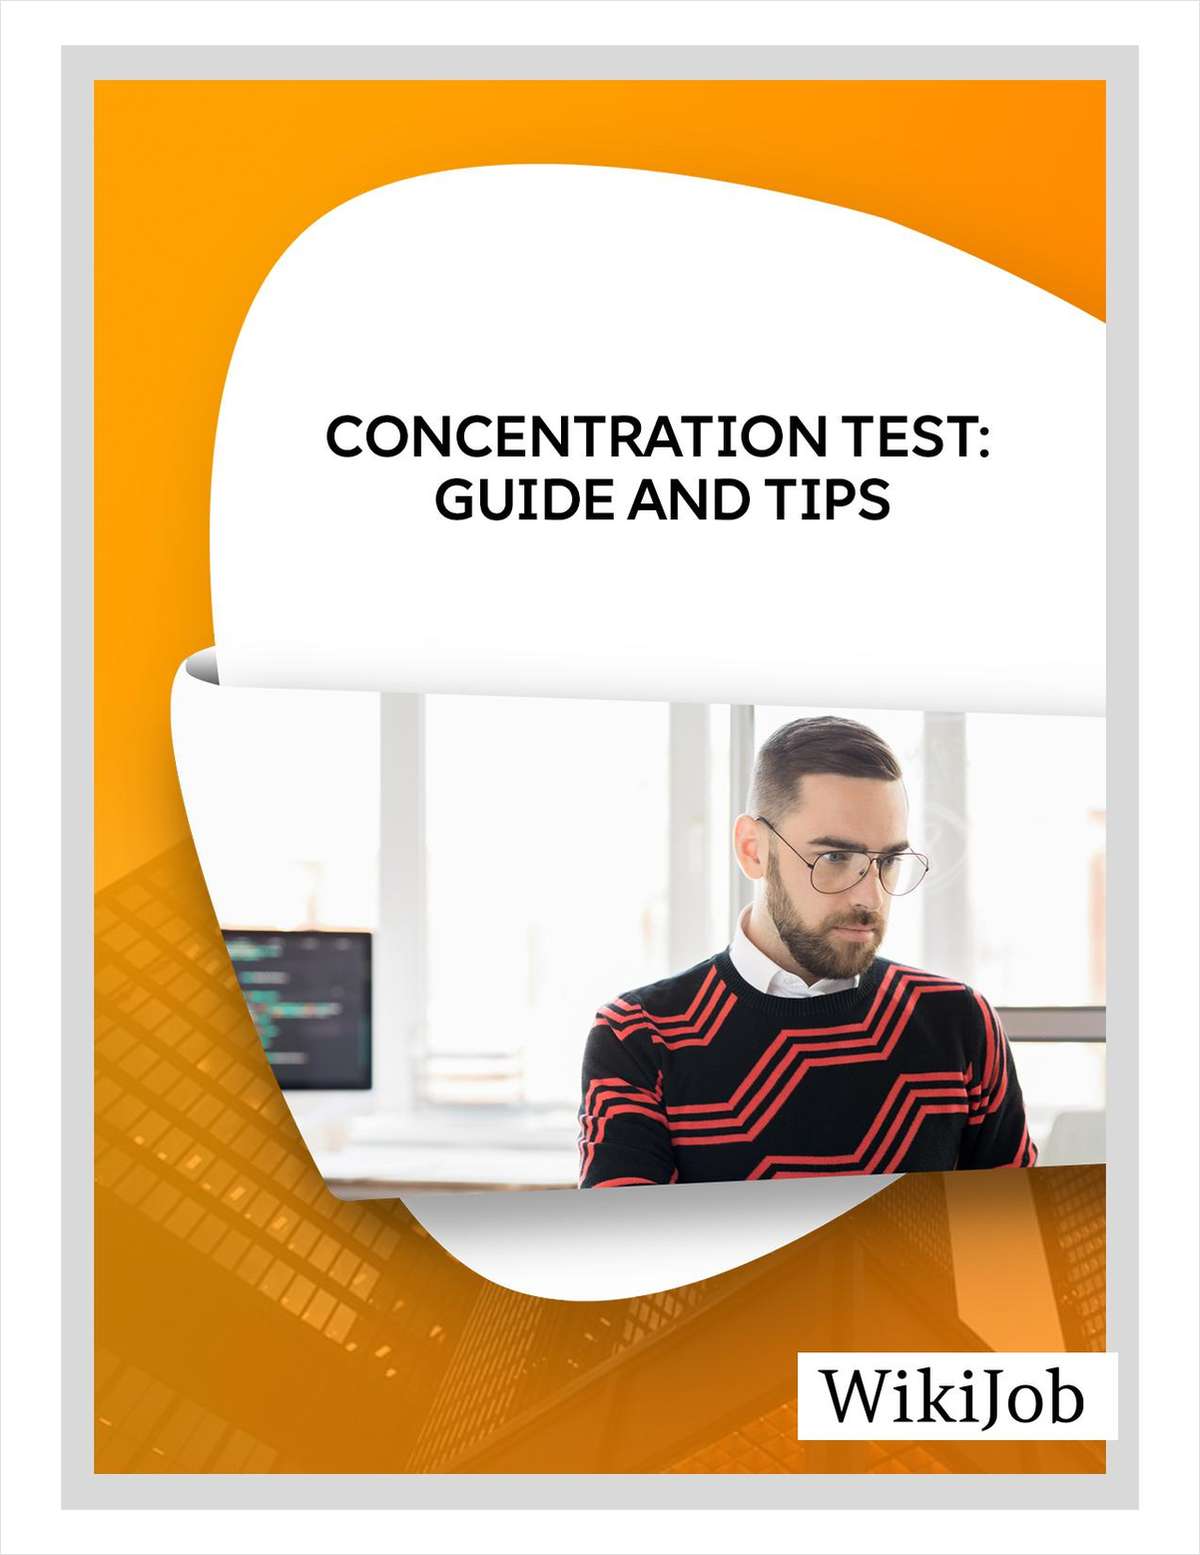 Concentration Test: Guide and Tips